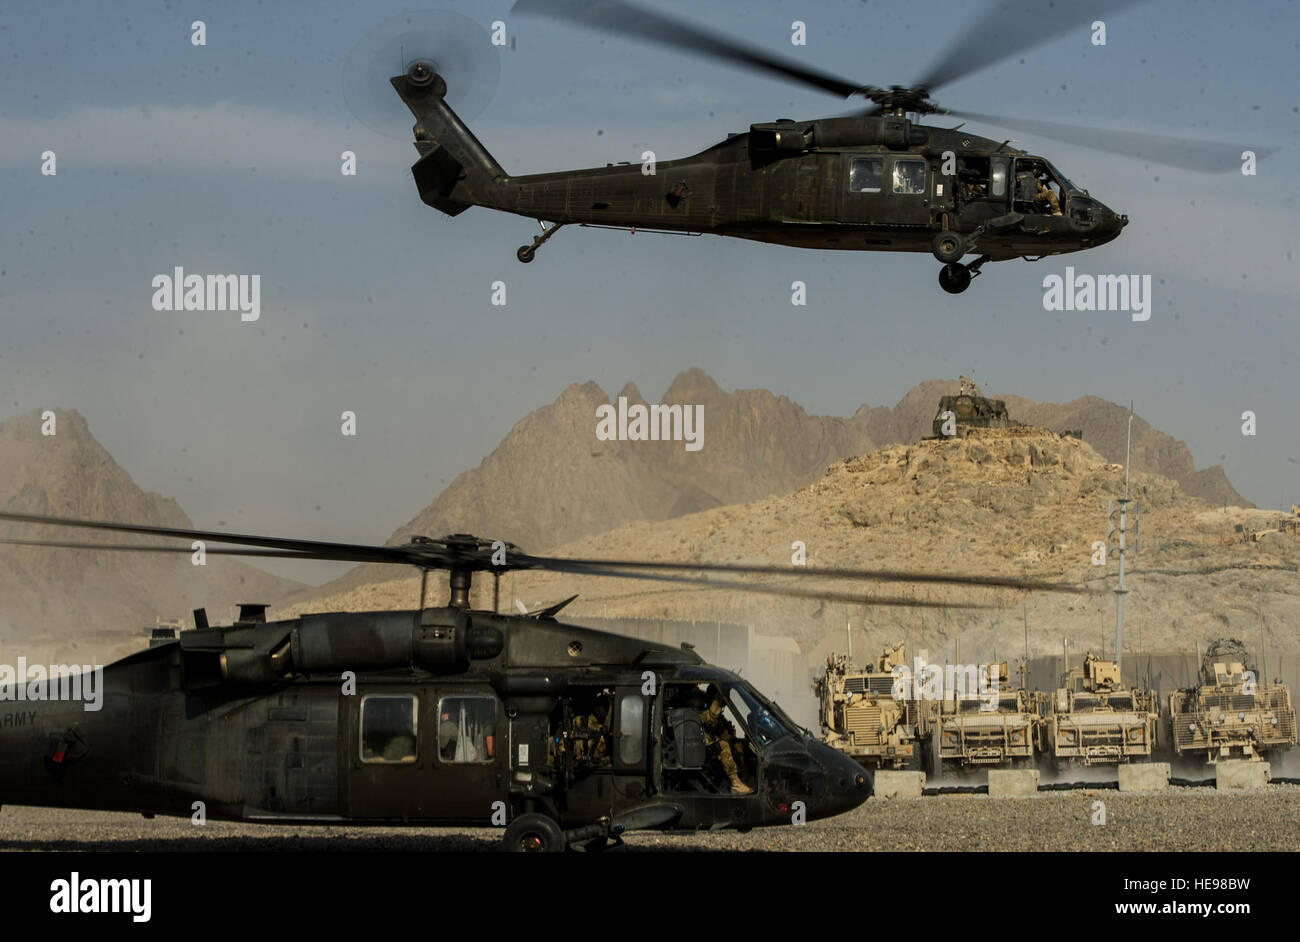 U.S. Army UH-60 Black Hawks takes off transporting troops to another location on Oct. 10, 2012, Forward Operating Base Masum Ghar, Afghanistan. The Black Hawk can perform a wide array of missions, including tactical transport of troops, electronic warfare, and aeromedical evacuation.  Staff Sgt. Jonathan Snyder)(NOT ) Stock Photo